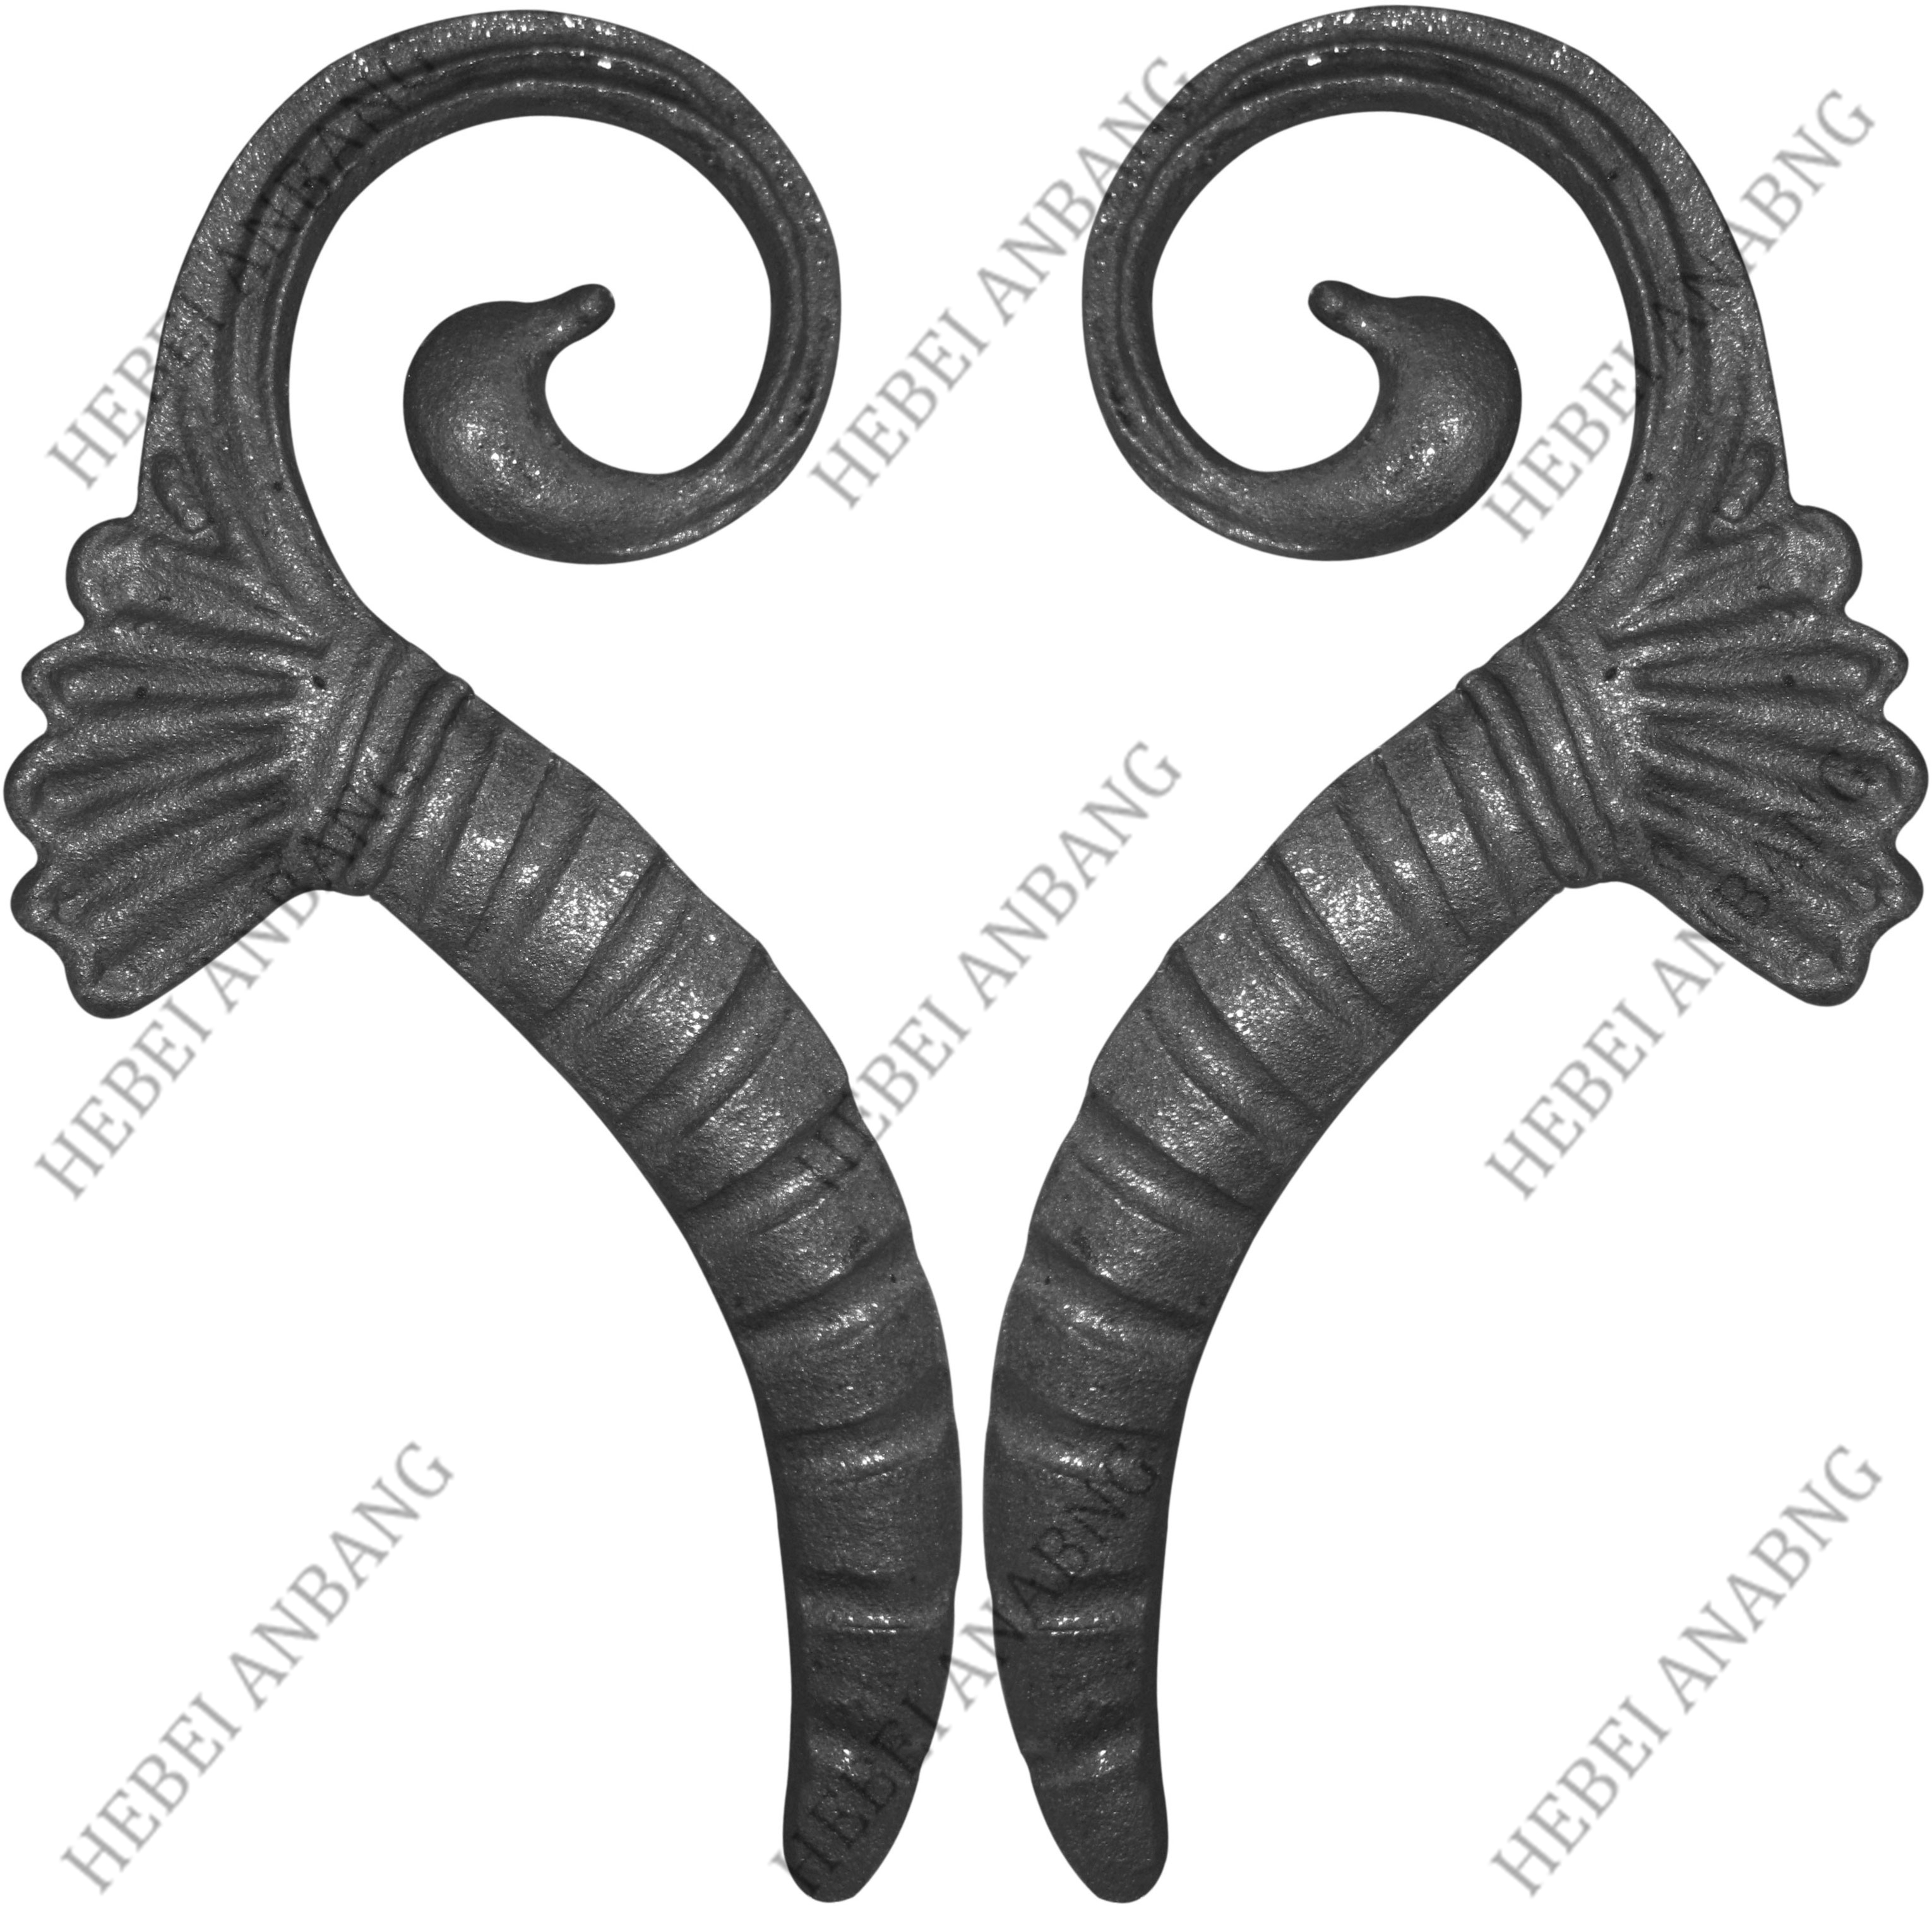 WHOLESALE WROUGHT IRON LEAVES/DECORATIVE CAST STEEL LEAVES AND FLOWER /CODE：4186